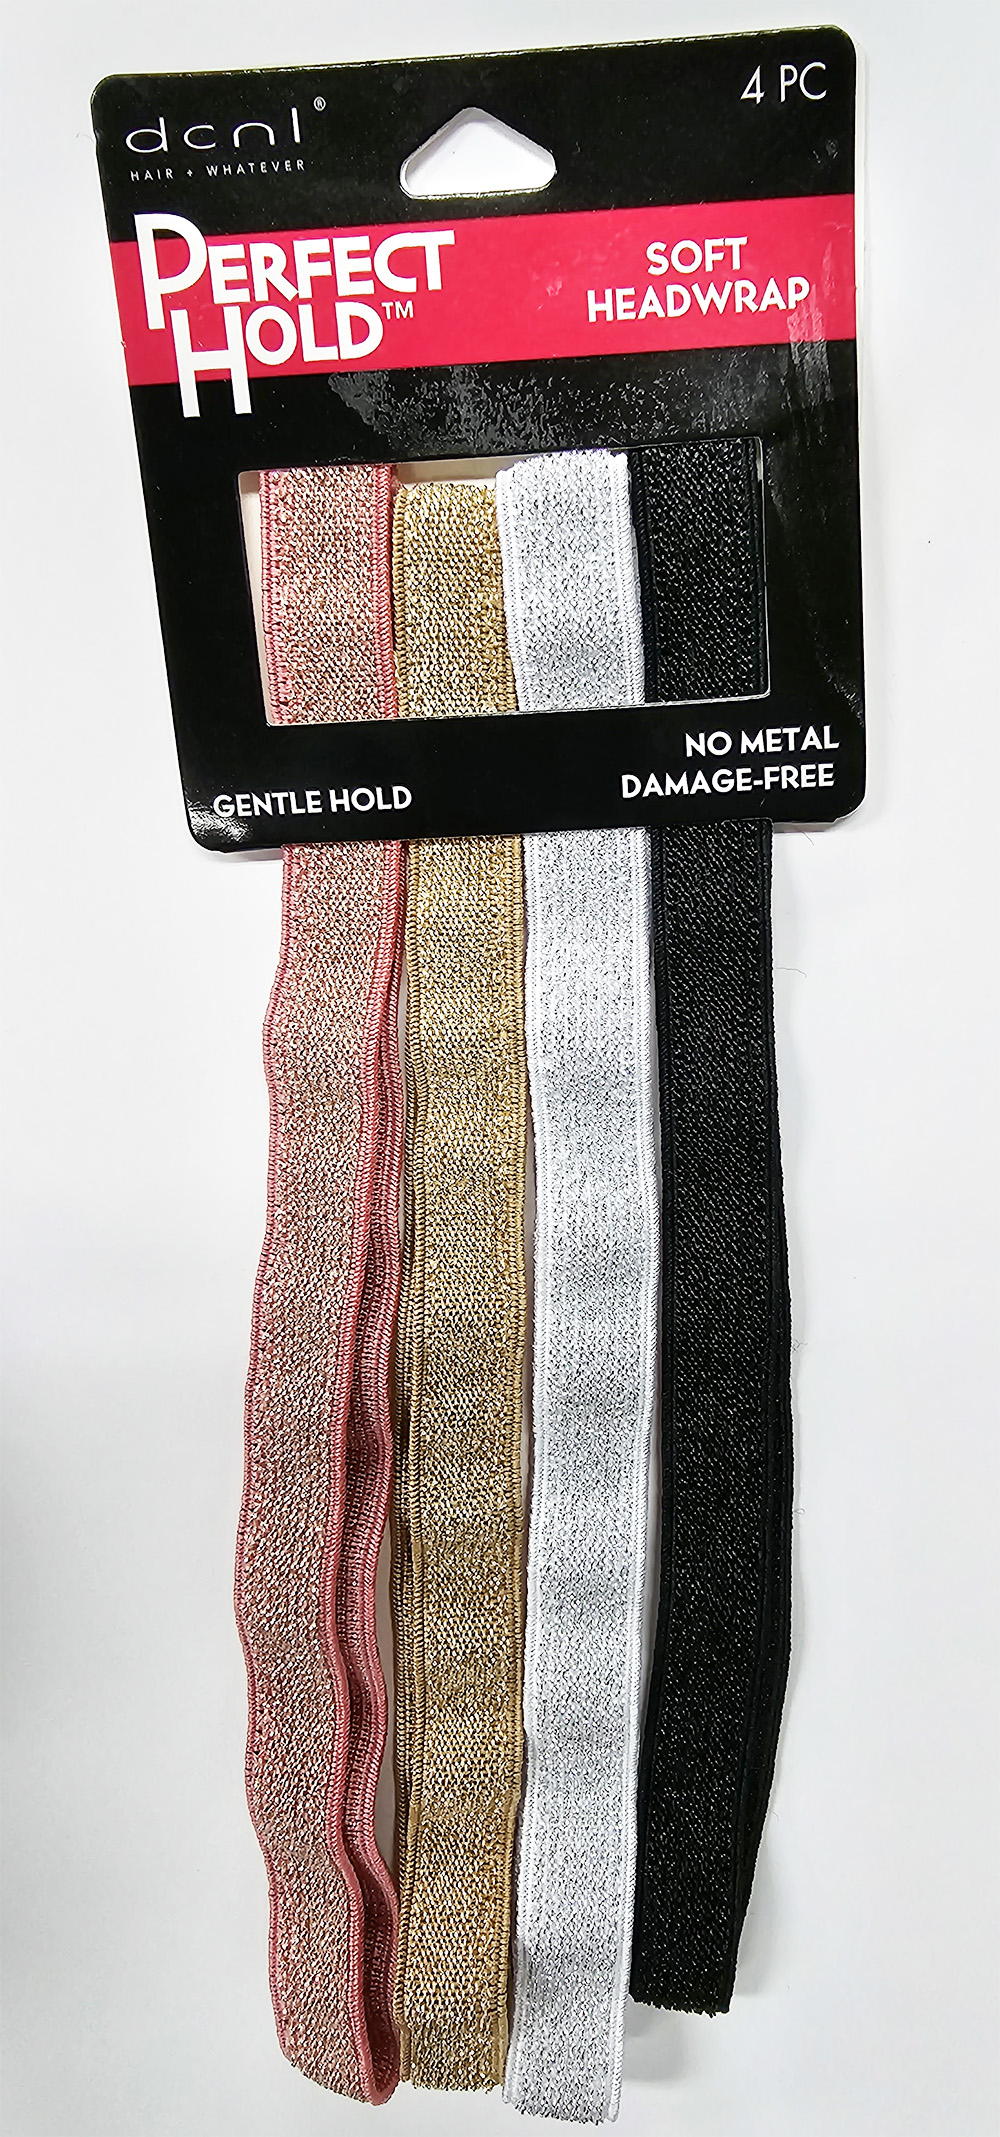 DCNL SOFT HEADWRAPS, 4 COUNT - Click Image to Close